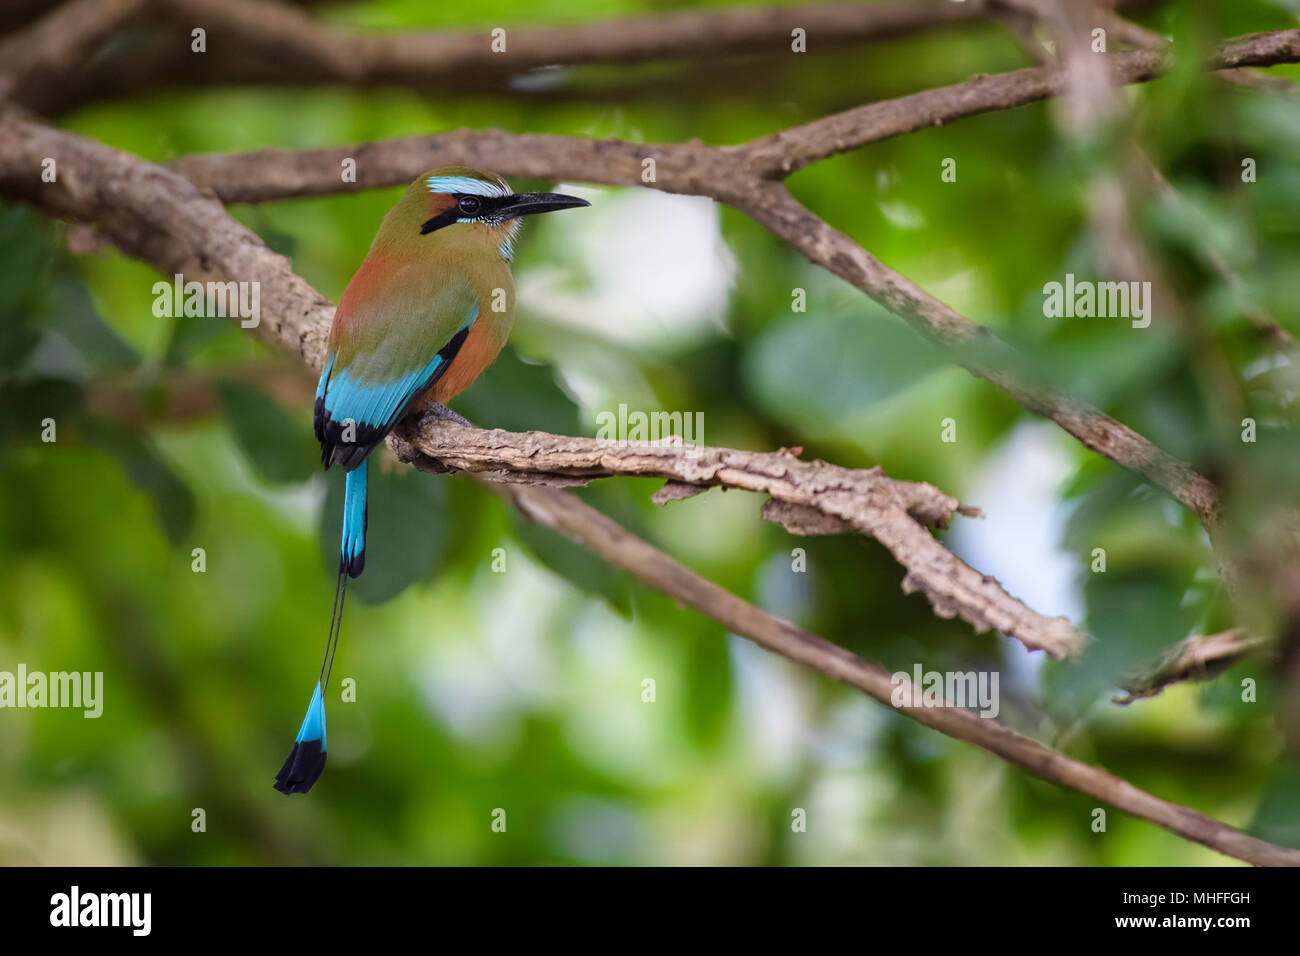 Turquoise-browed Motmot - Eumomota superciliosa, beautiful colorful motmot from Central America forests, Costa Rica. Stock Photo